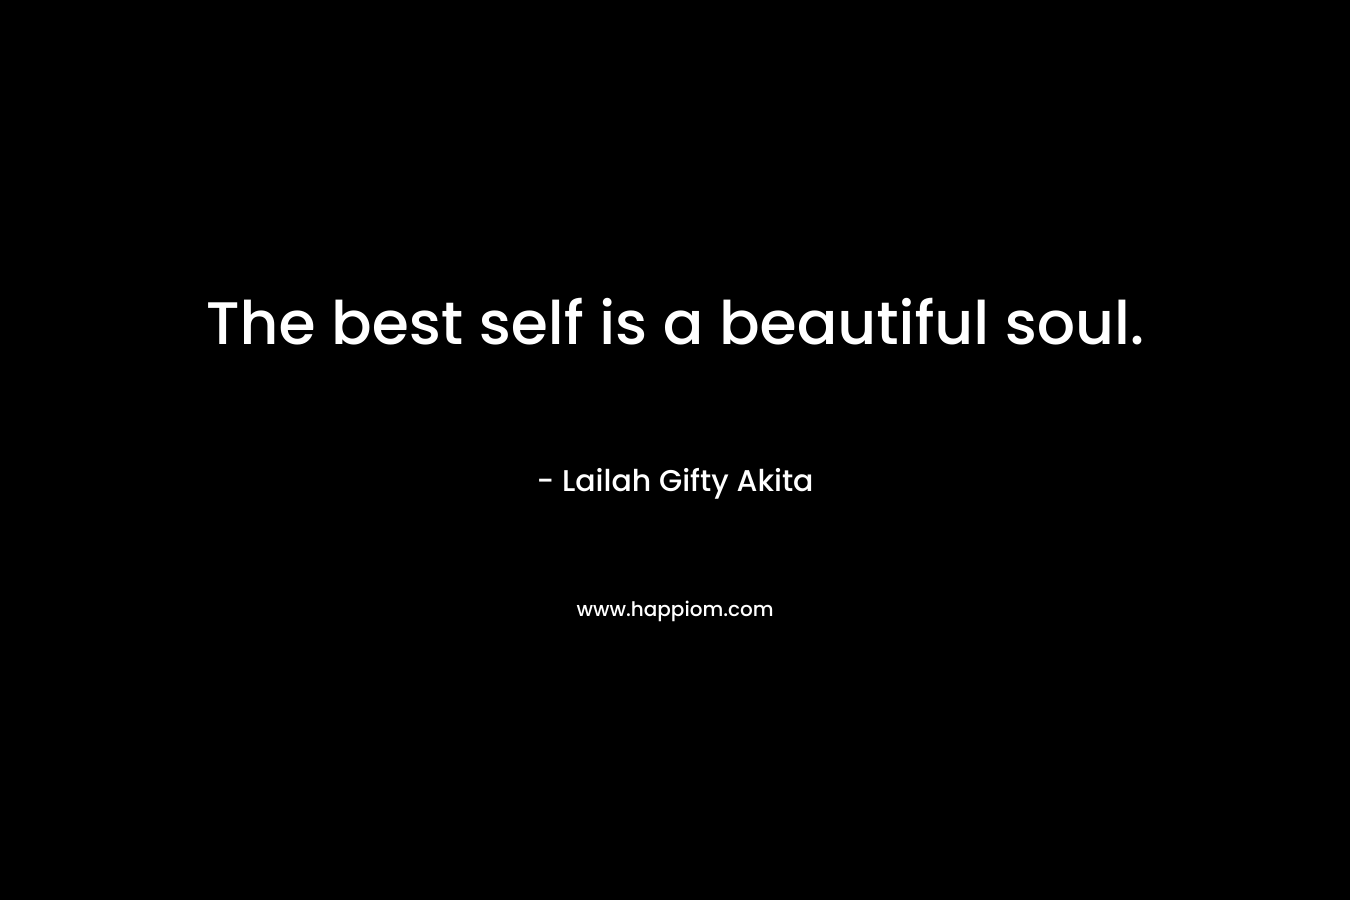 The best self is a beautiful soul.